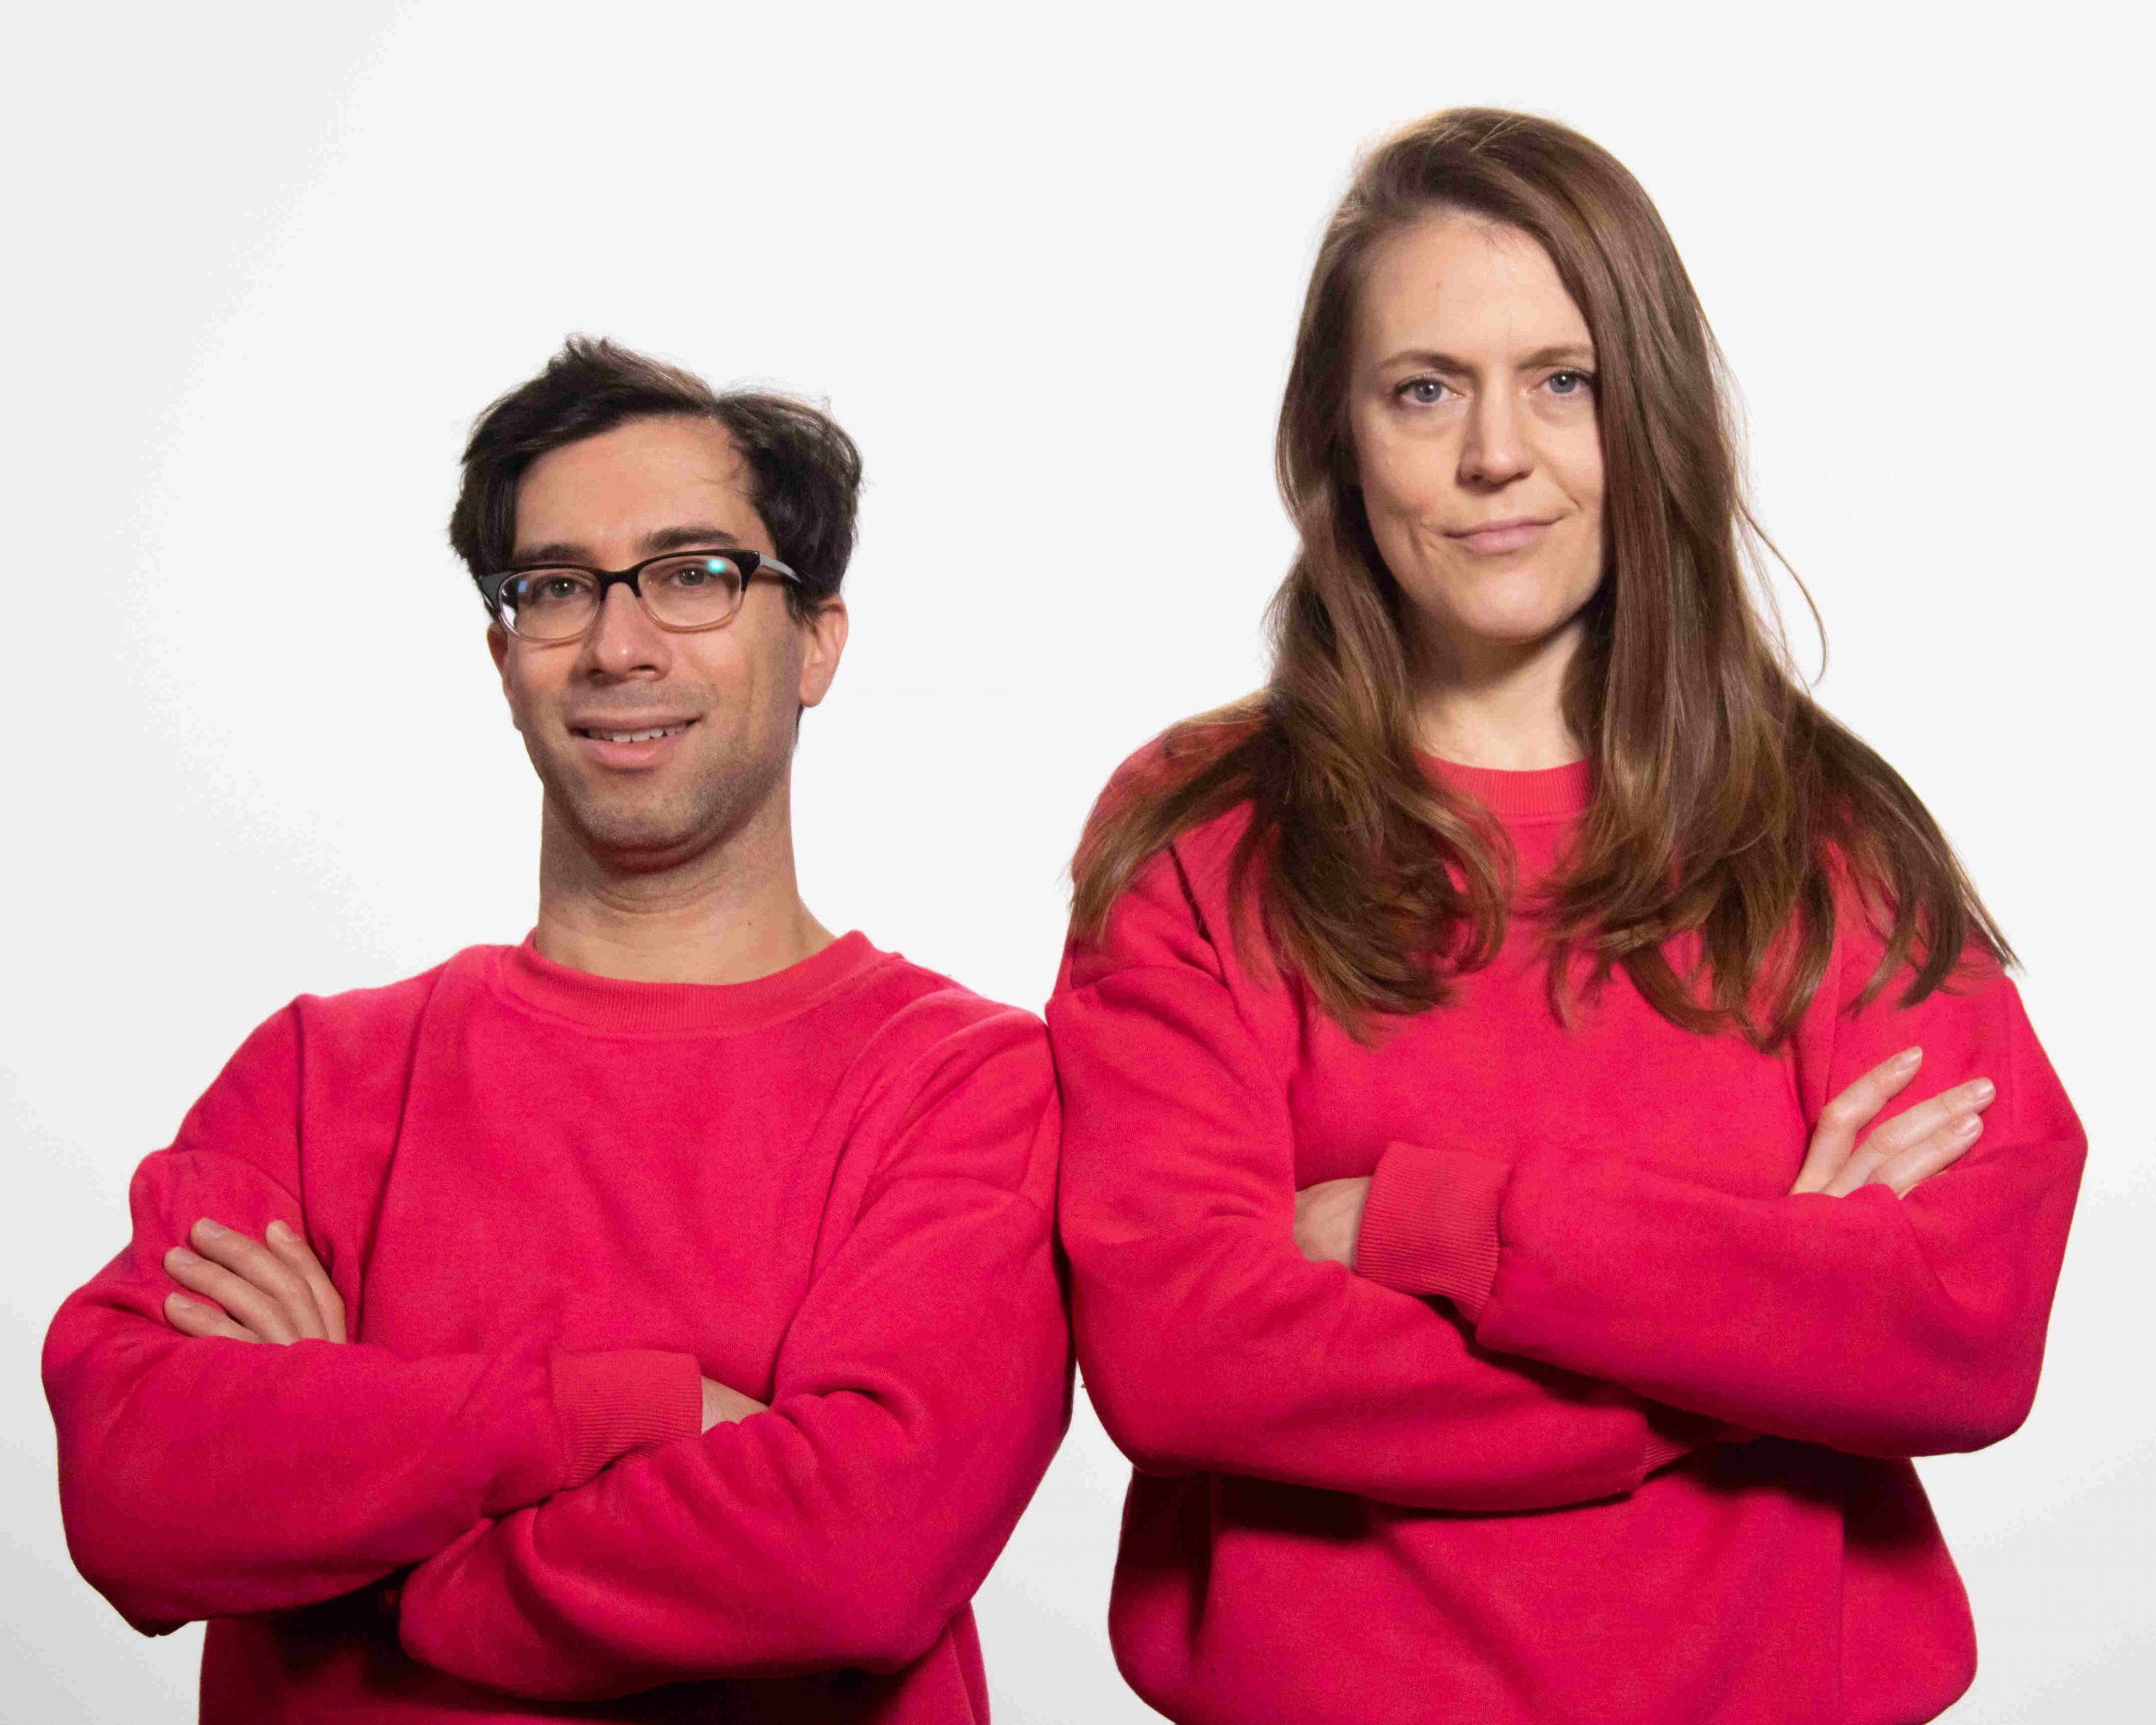 Jonathan Kaplan and Marianne Bayard are trying to be serious for this publicity shot for their comedy team of Mares & Kaps, but you know they are ready to bust out laughing at any moment.